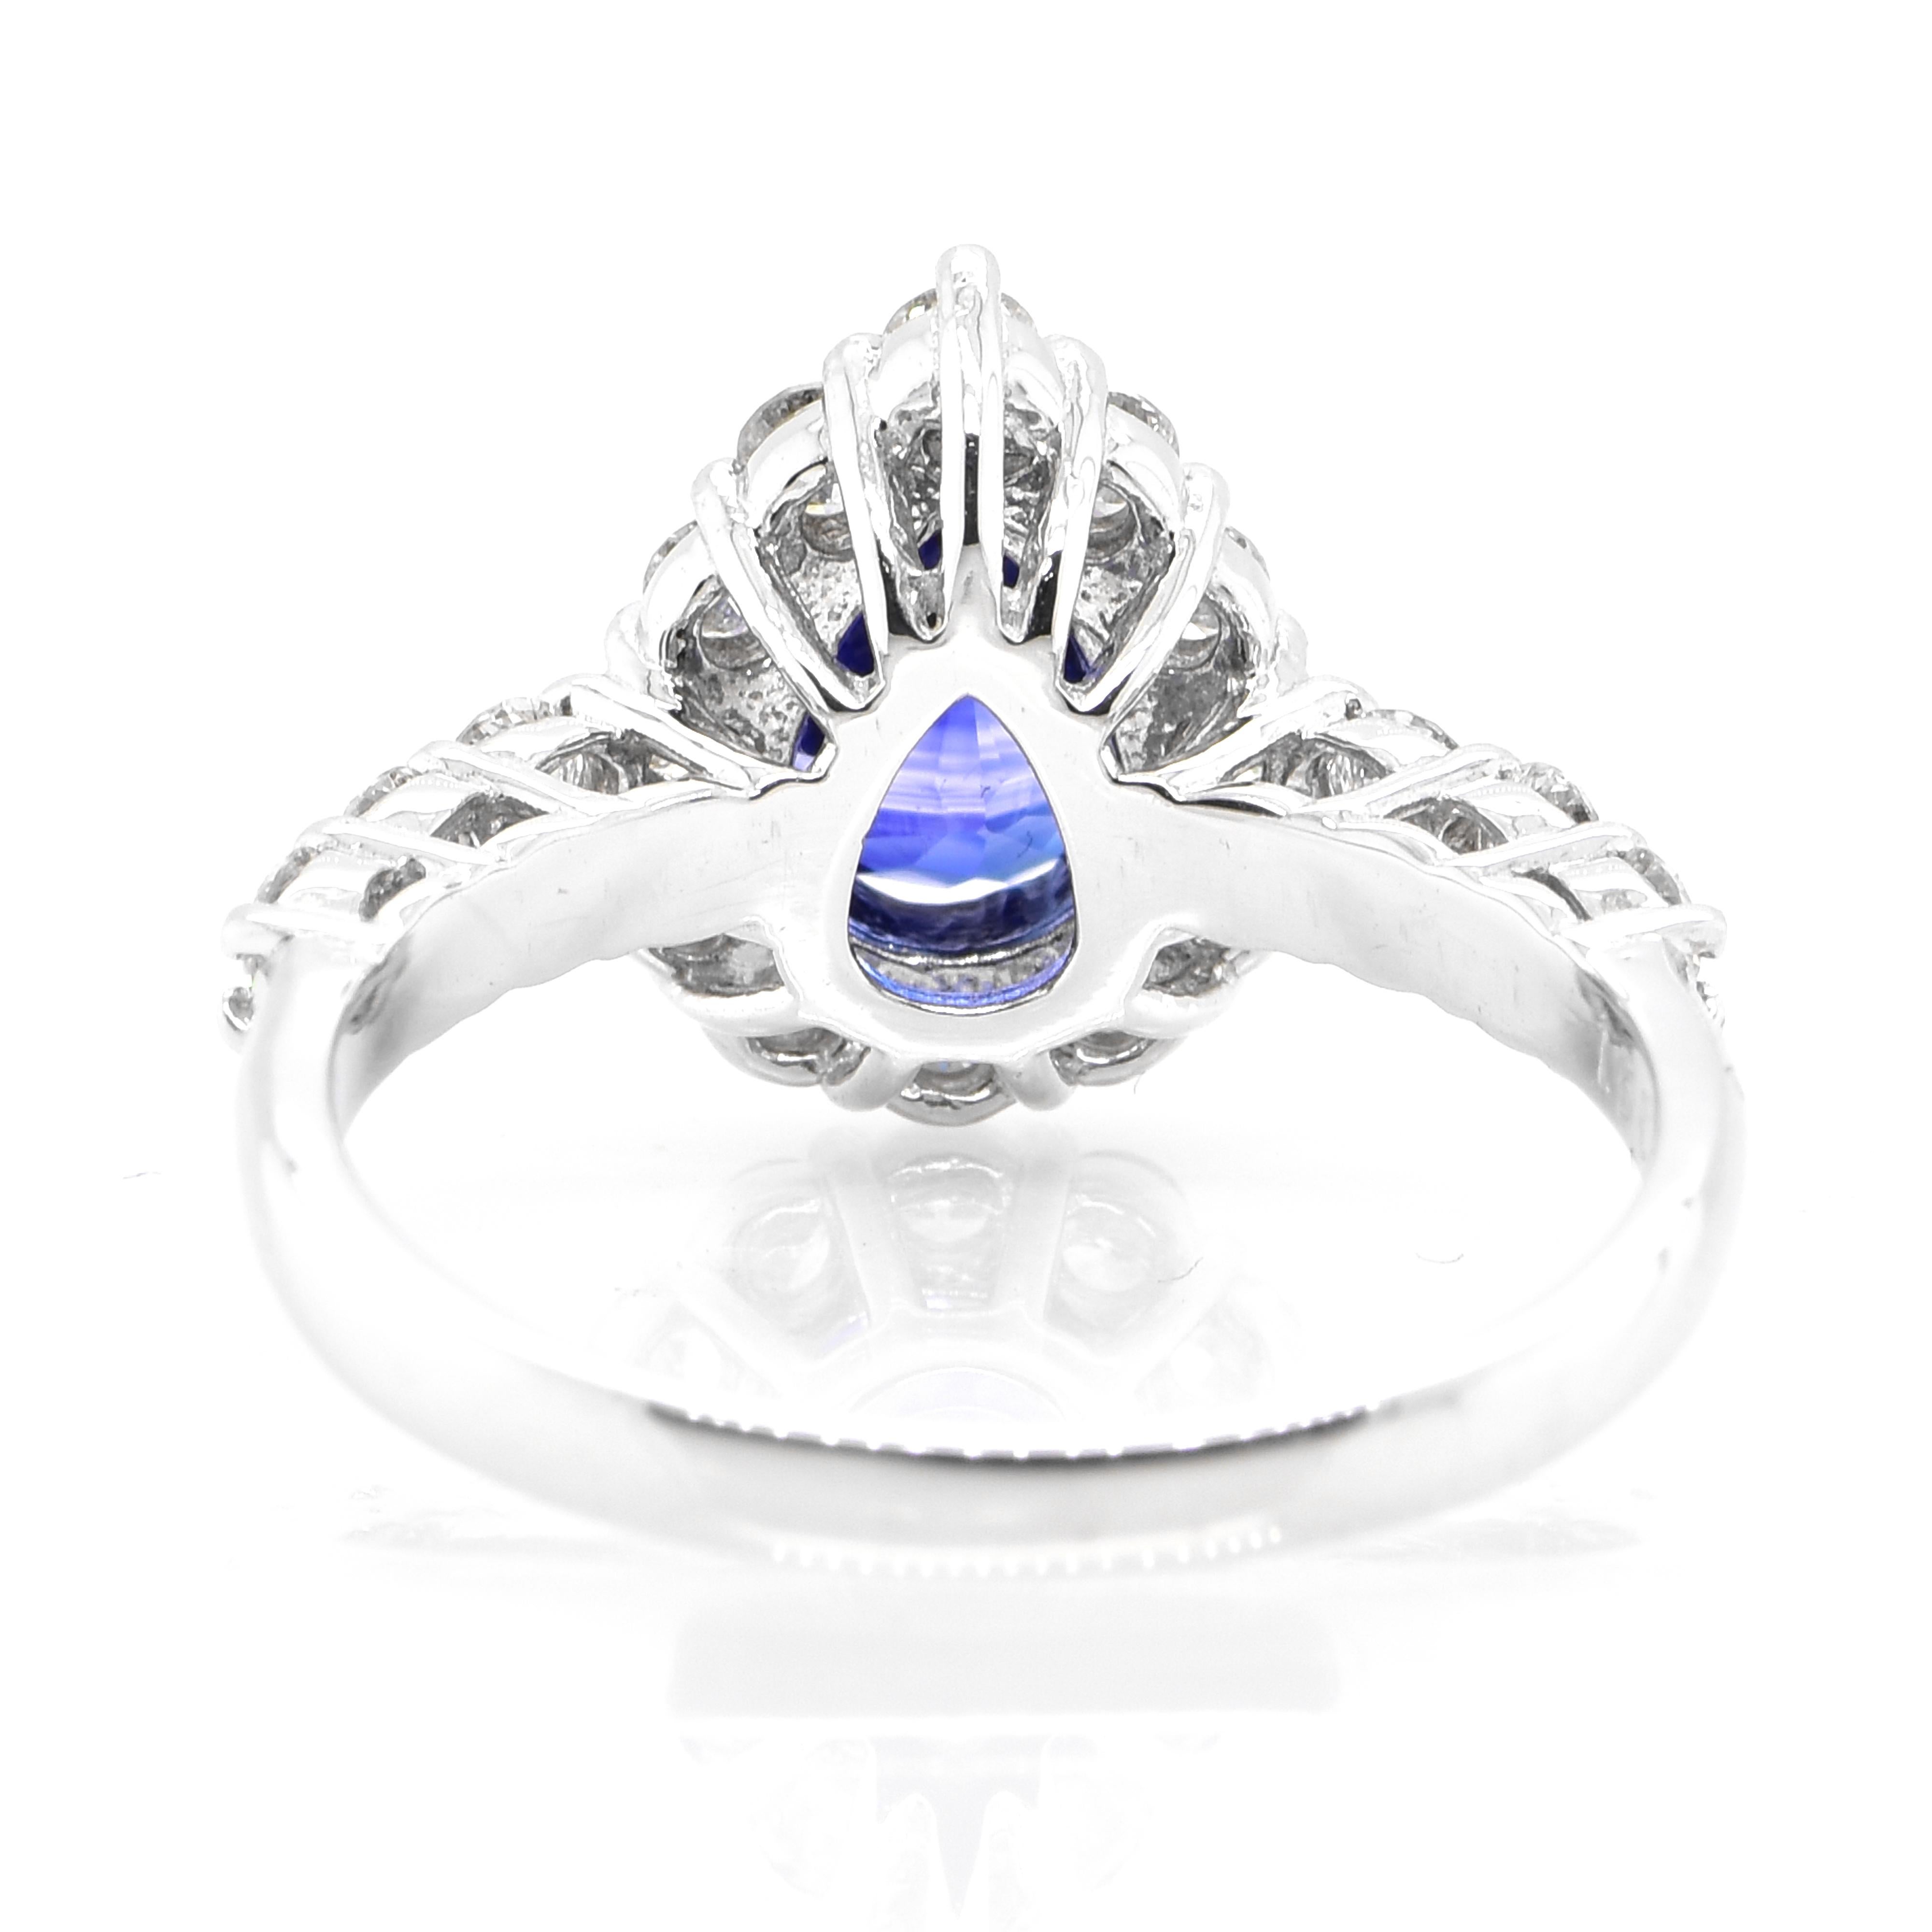 Women's 1.50 Carat Natural Royal Blue Color Sapphire and Diamond Ring Made in Platinum For Sale